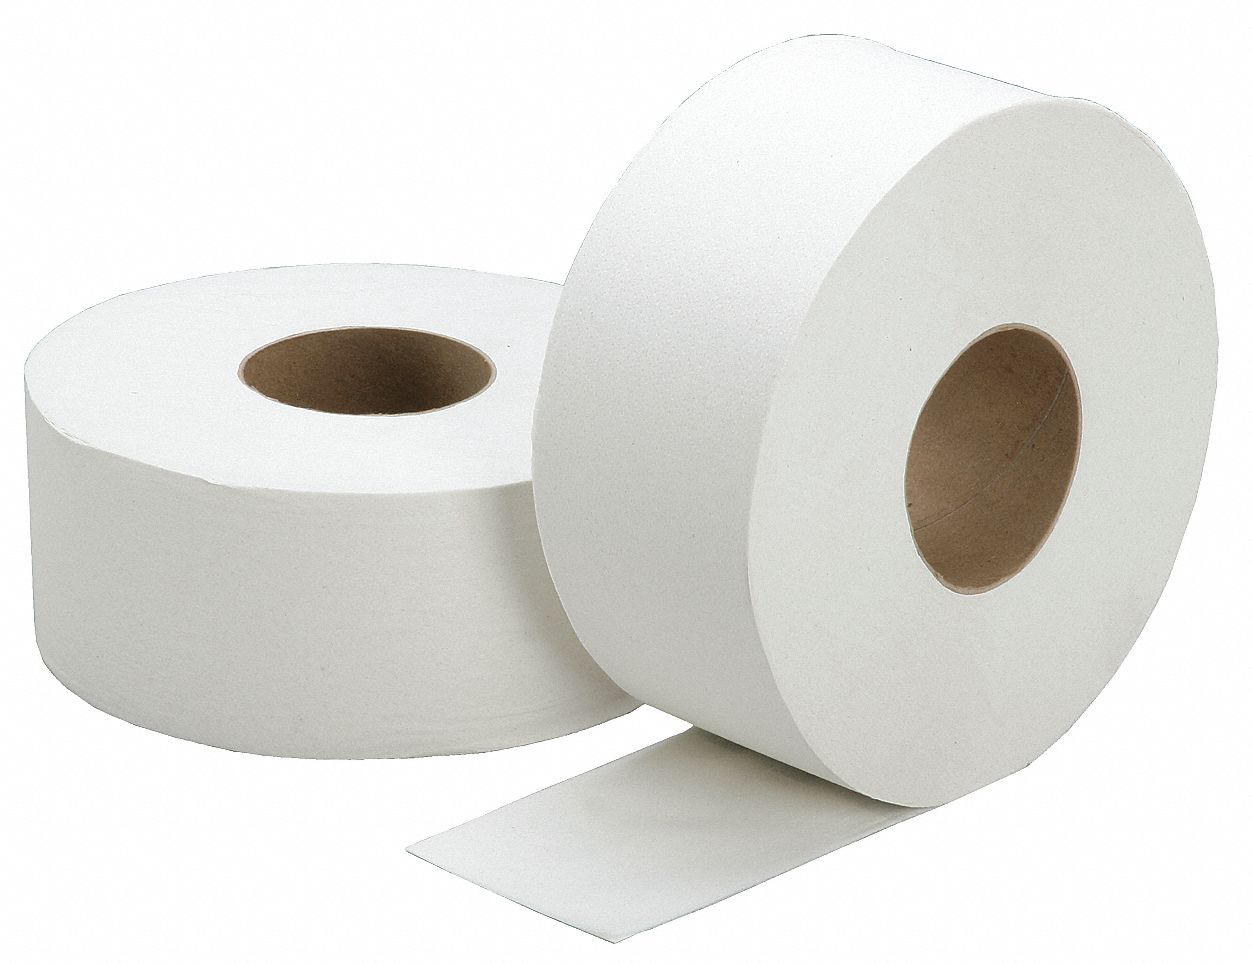 ABILITY ONE Toilet Paper Roll: 2 Ply, Continuous Sheets, 1,000 ft Roll Lg,  9 in Roll Dia., 12 PK